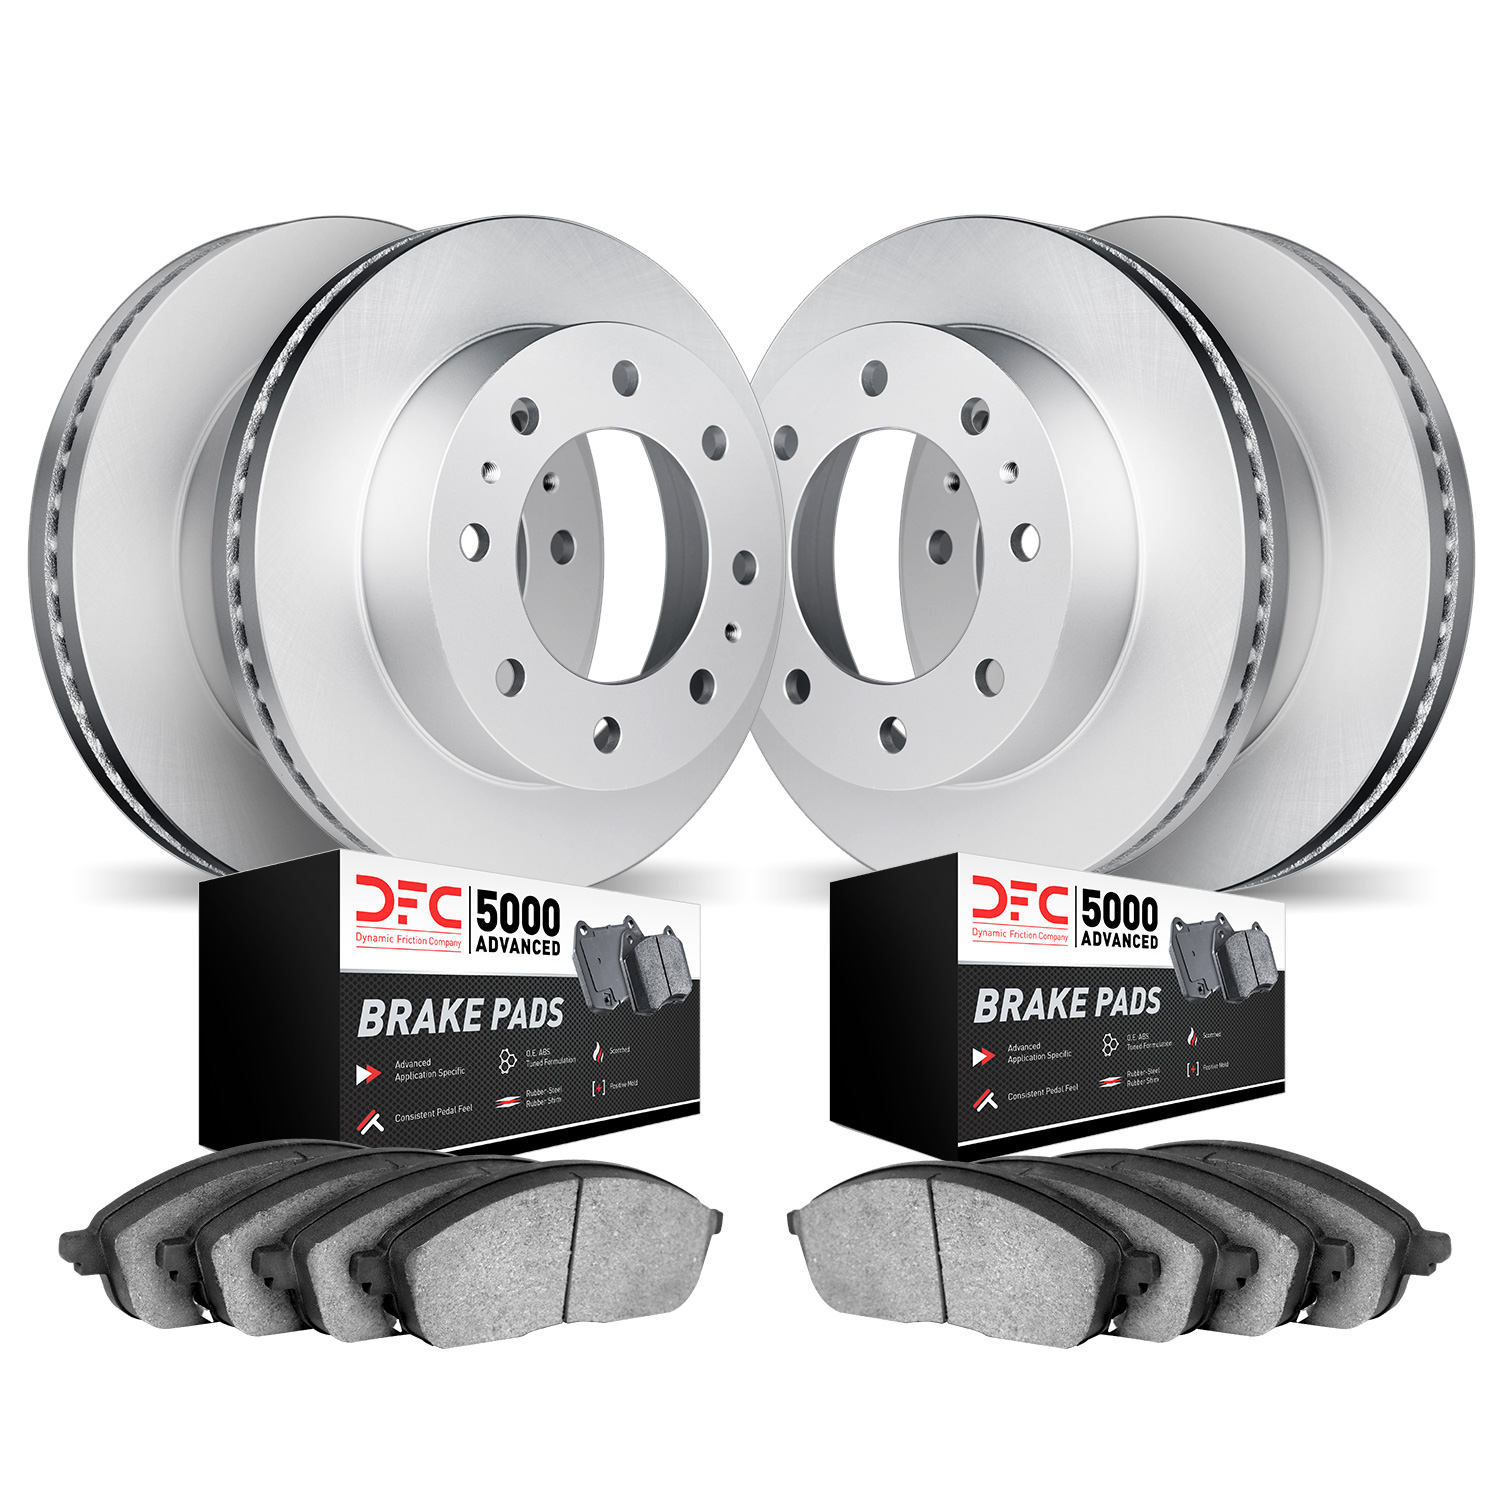 4504-54091 Geospec Brake Rotors w/5000 Advanced Brake Pads Kit, Fits Select Ford/Lincoln/Mercury/Mazda, Position: Front and Rear